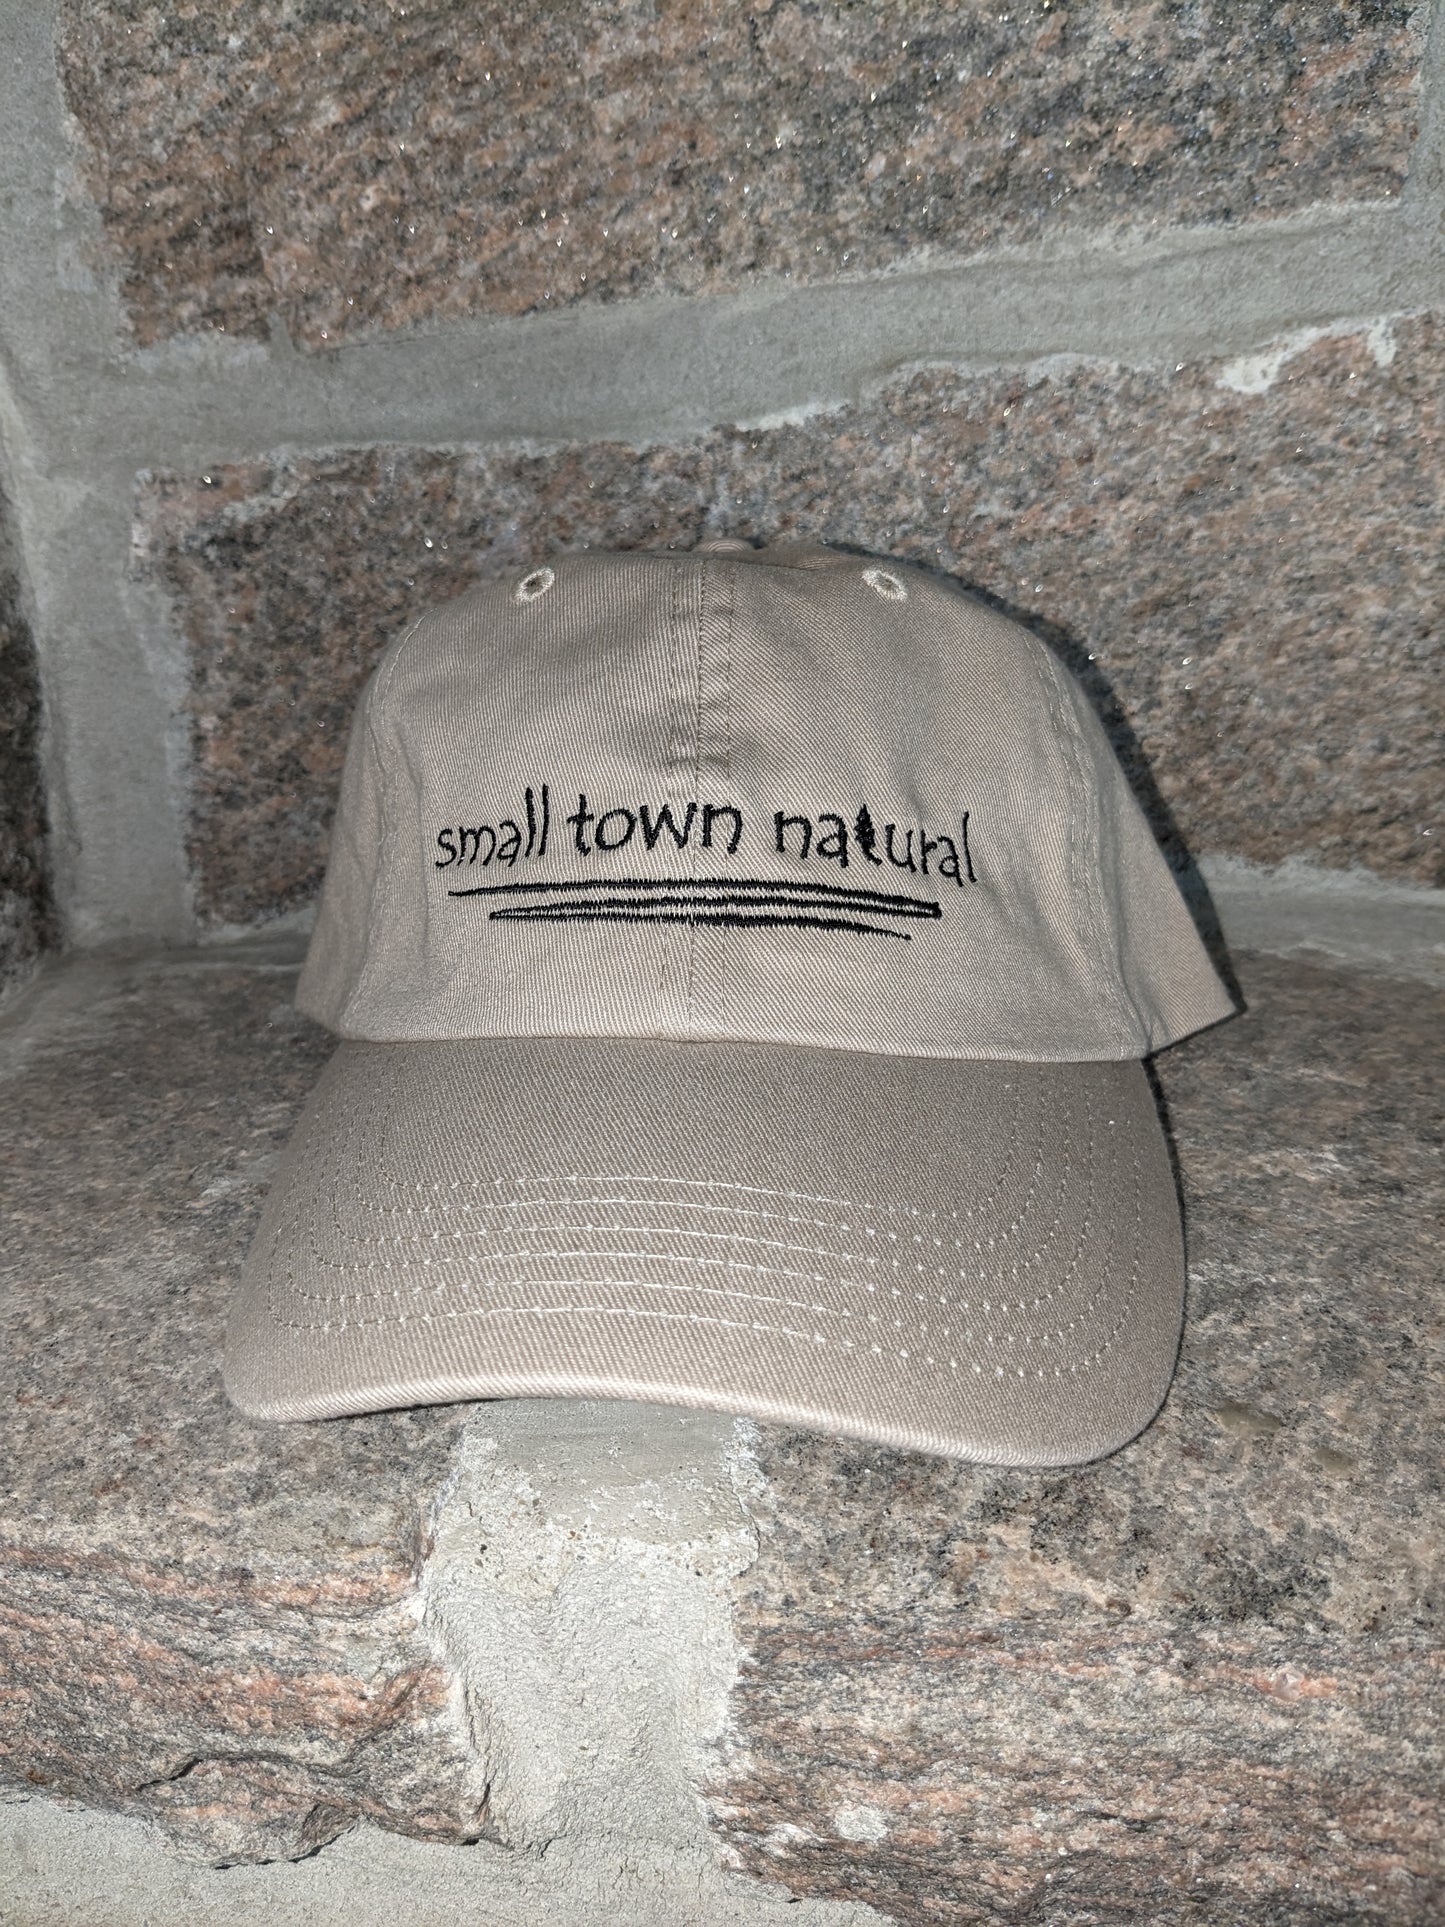 Hat 100% Cotton Small Town Natural ('t' in natural is a tree embroidered graphic of same height as text) is embroidered in plain hand-printed text/font on front of your choice of sand or baby blue hathat in black thread (on black hat thread is light grey) with a thin zigzag line under text representing winding river / creek)